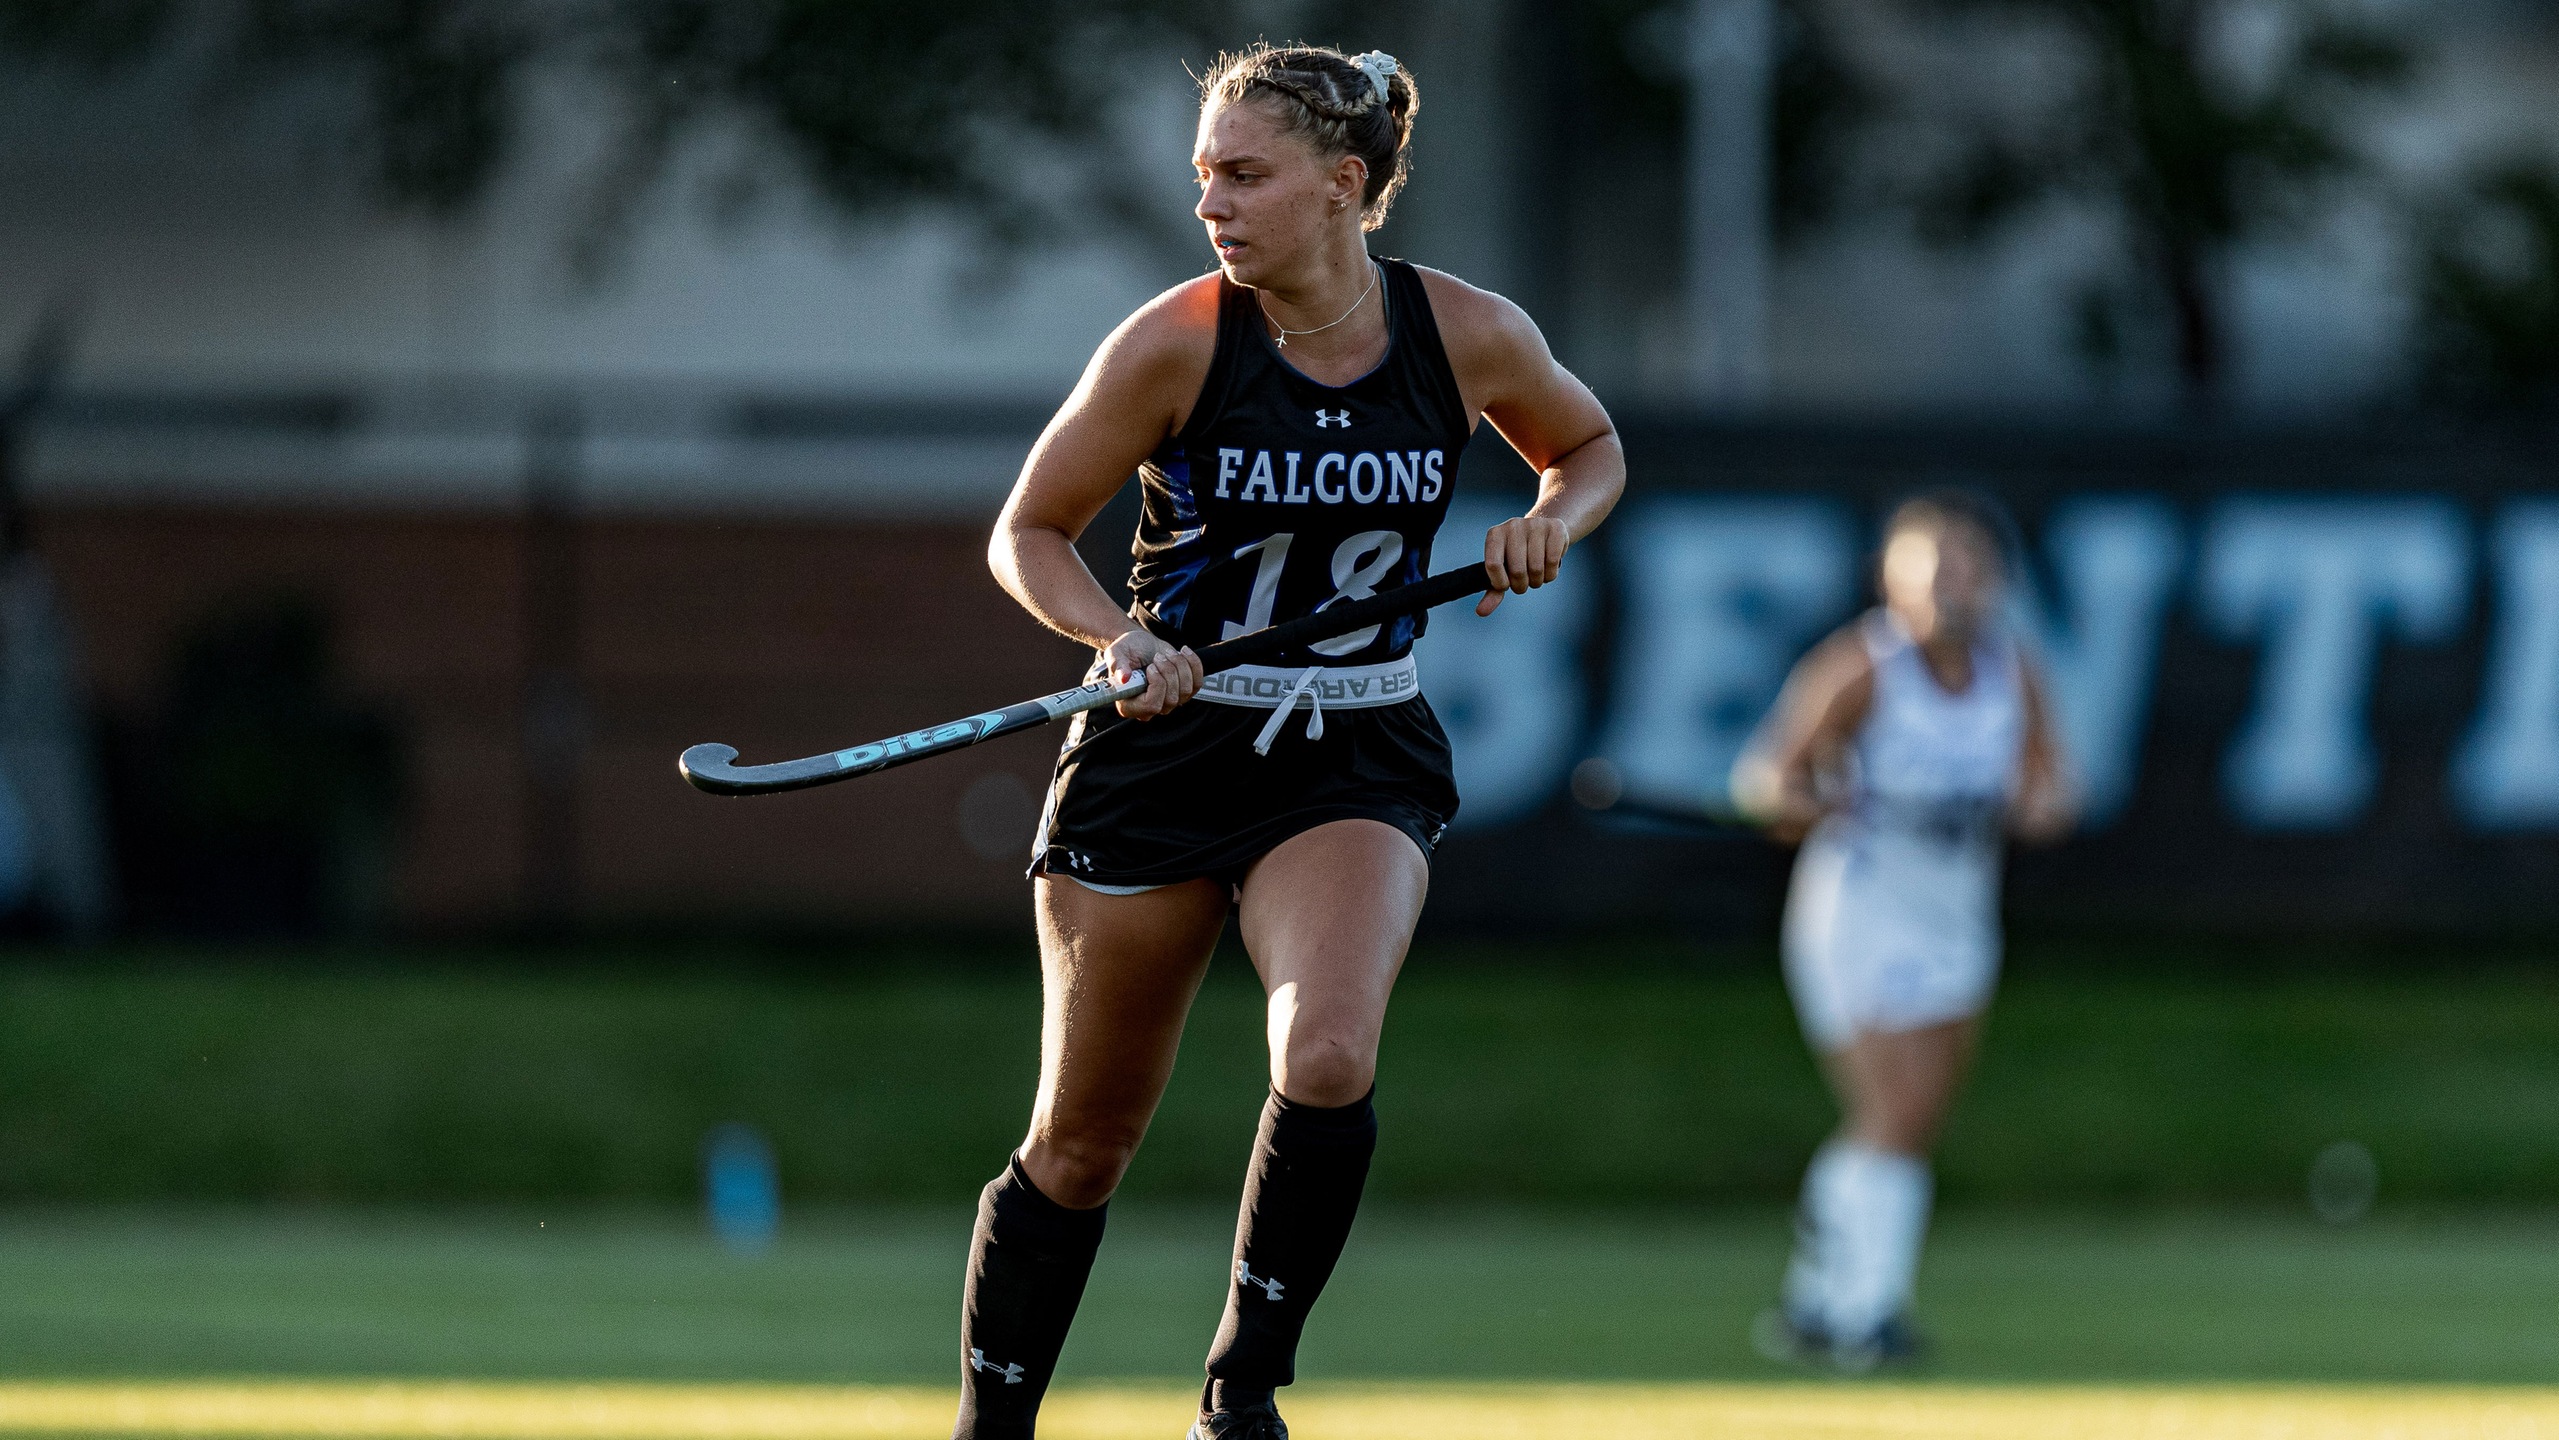 Falcons downed in overtime, 1-0, at St. Anselm